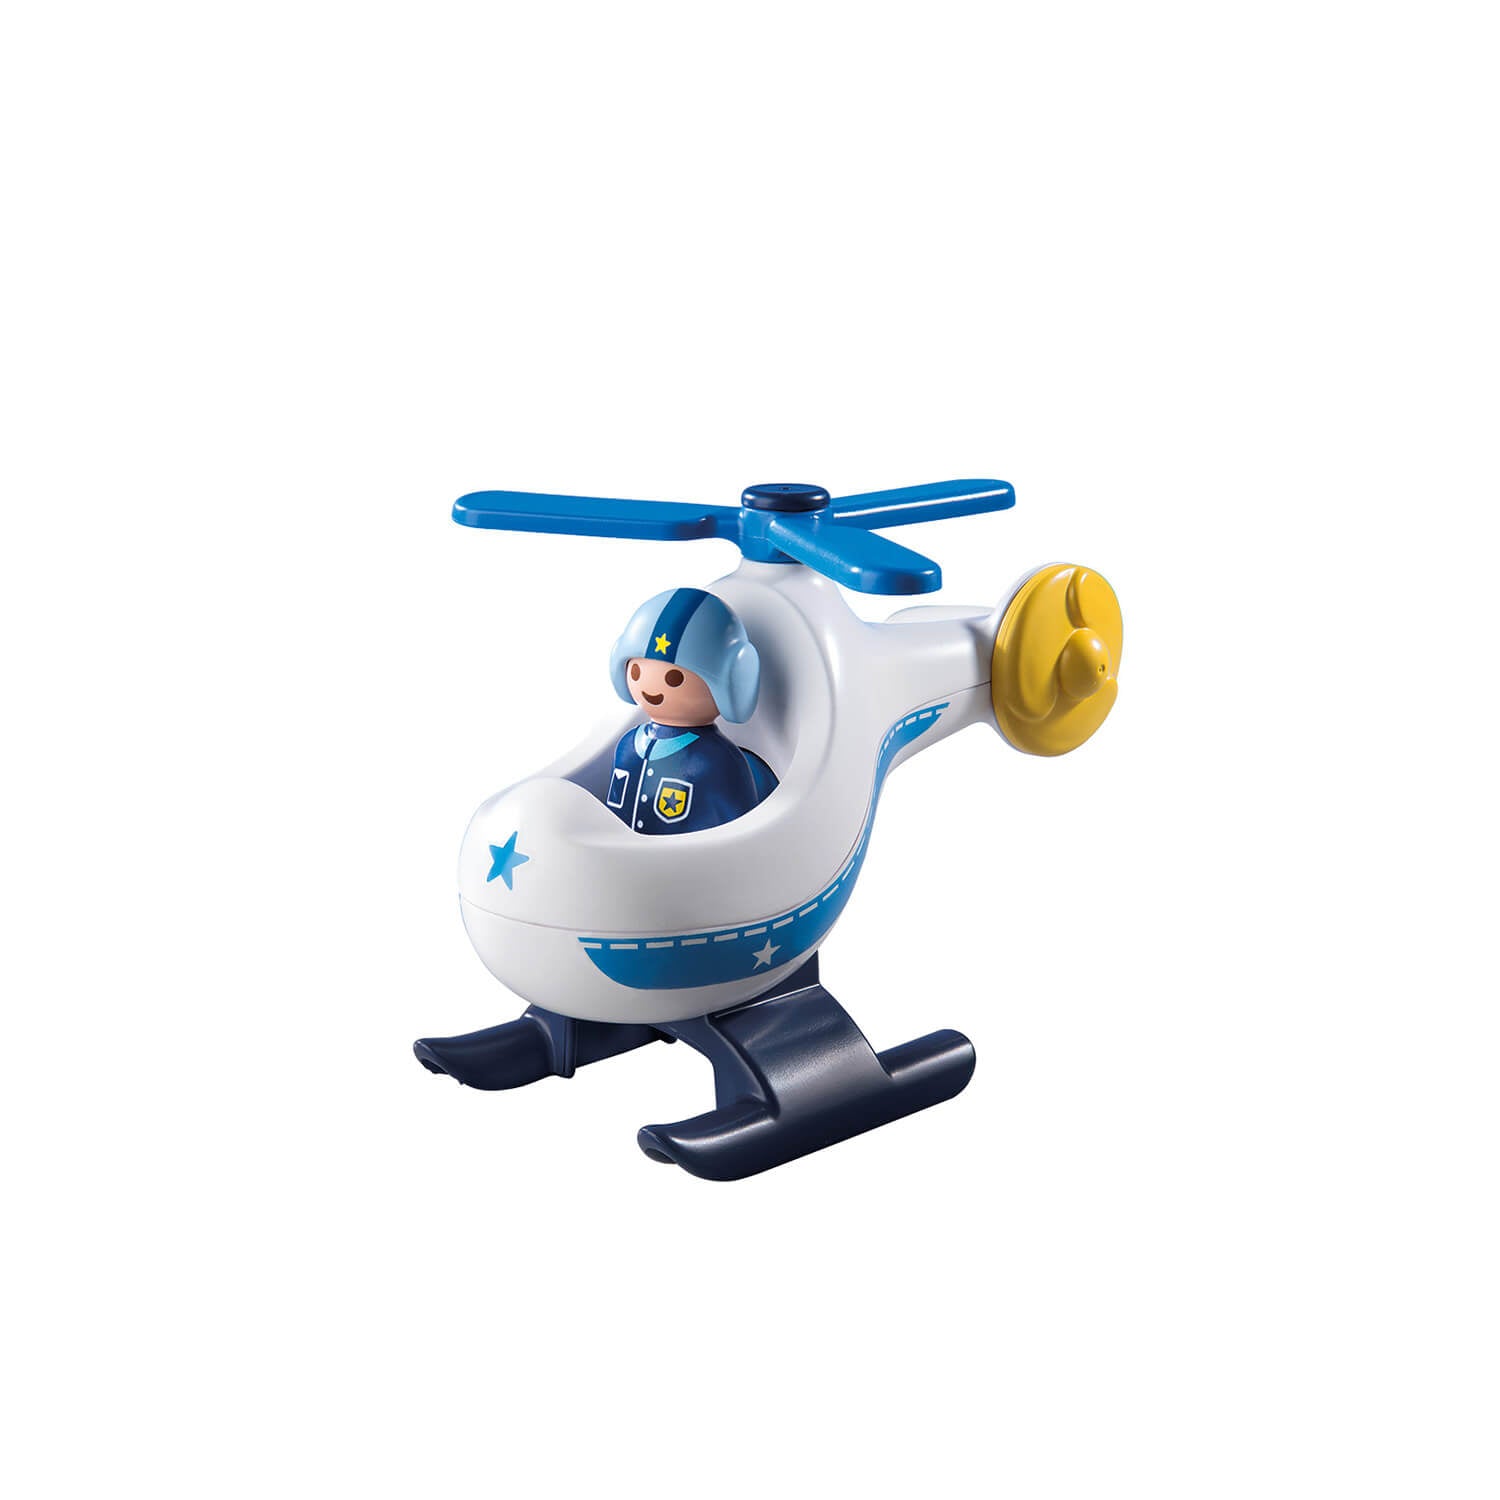 PLAYMOBIL 1.2.3 Police Copter (9383)